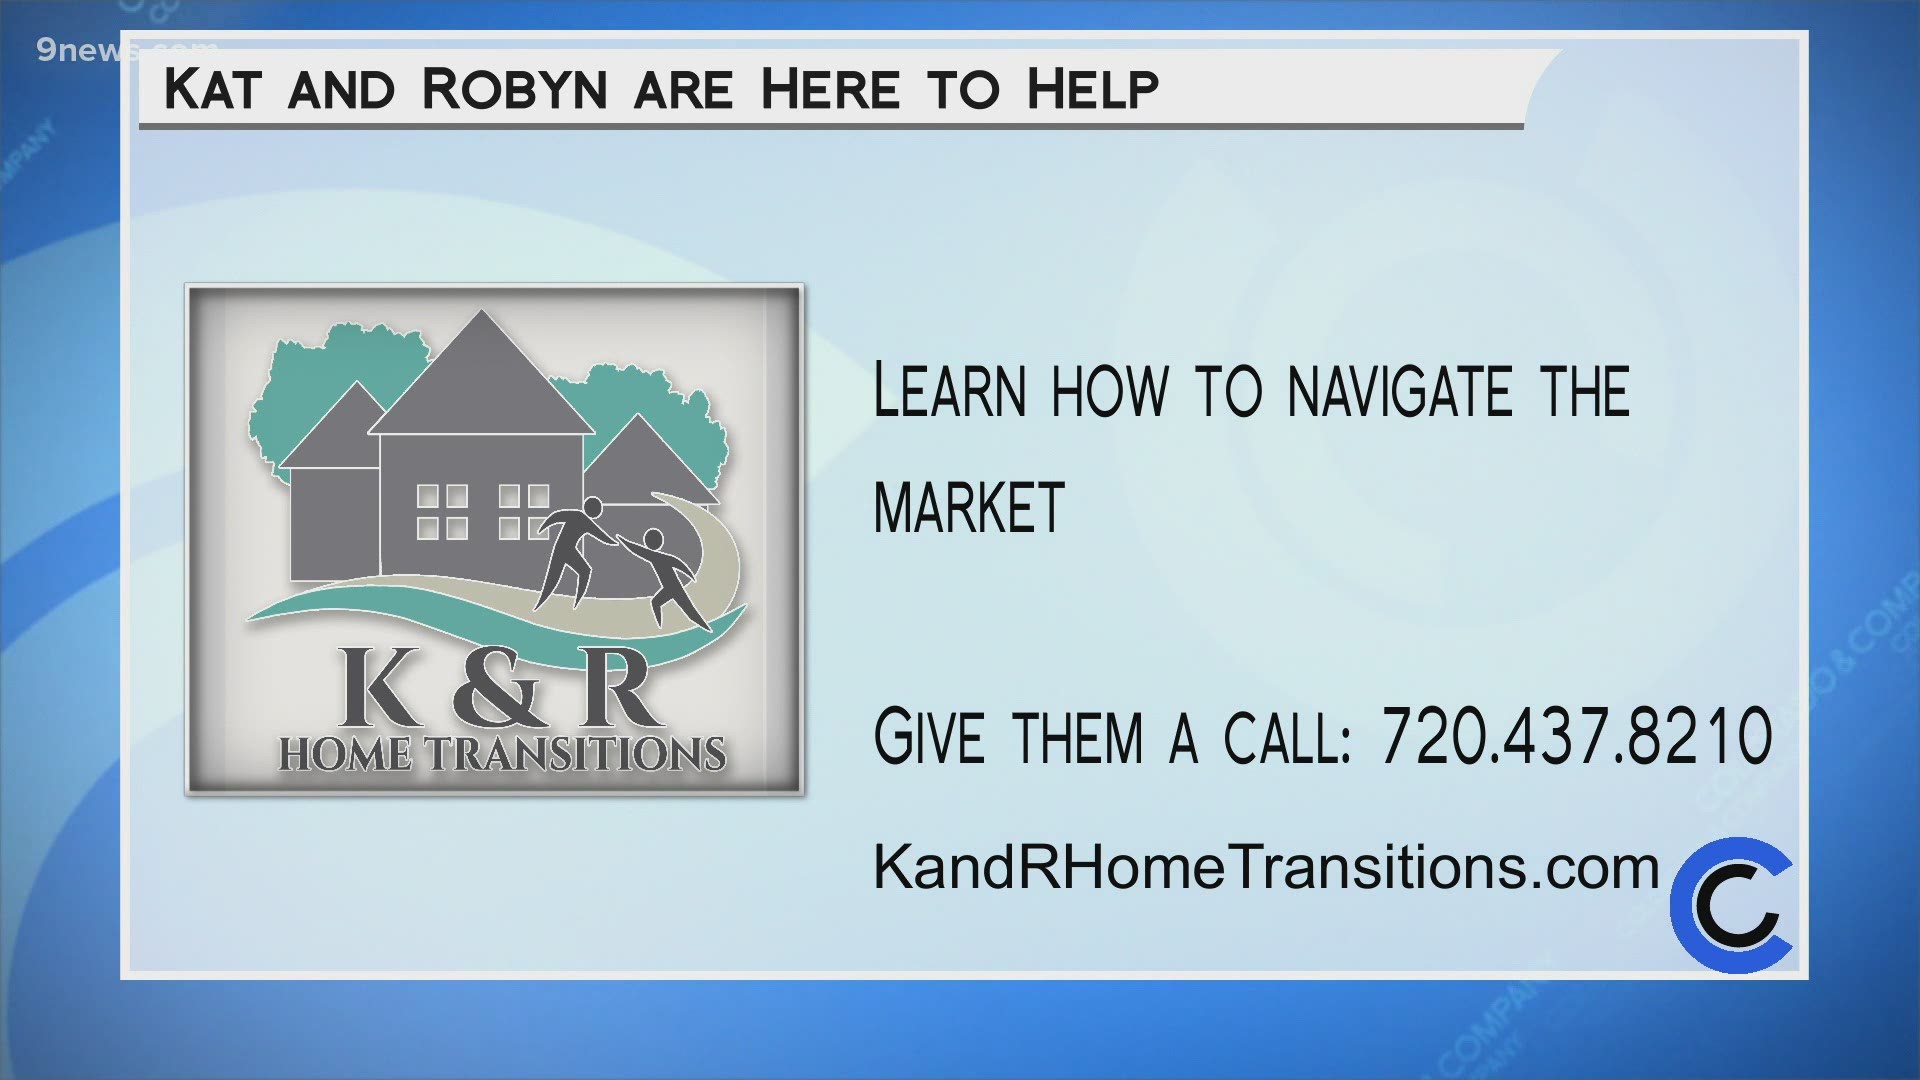 K&R has resources and seminars available to learn more about buying and selling a home. Learn more by calling 720.437.8210 or visit KandRHomeTransitions.com.